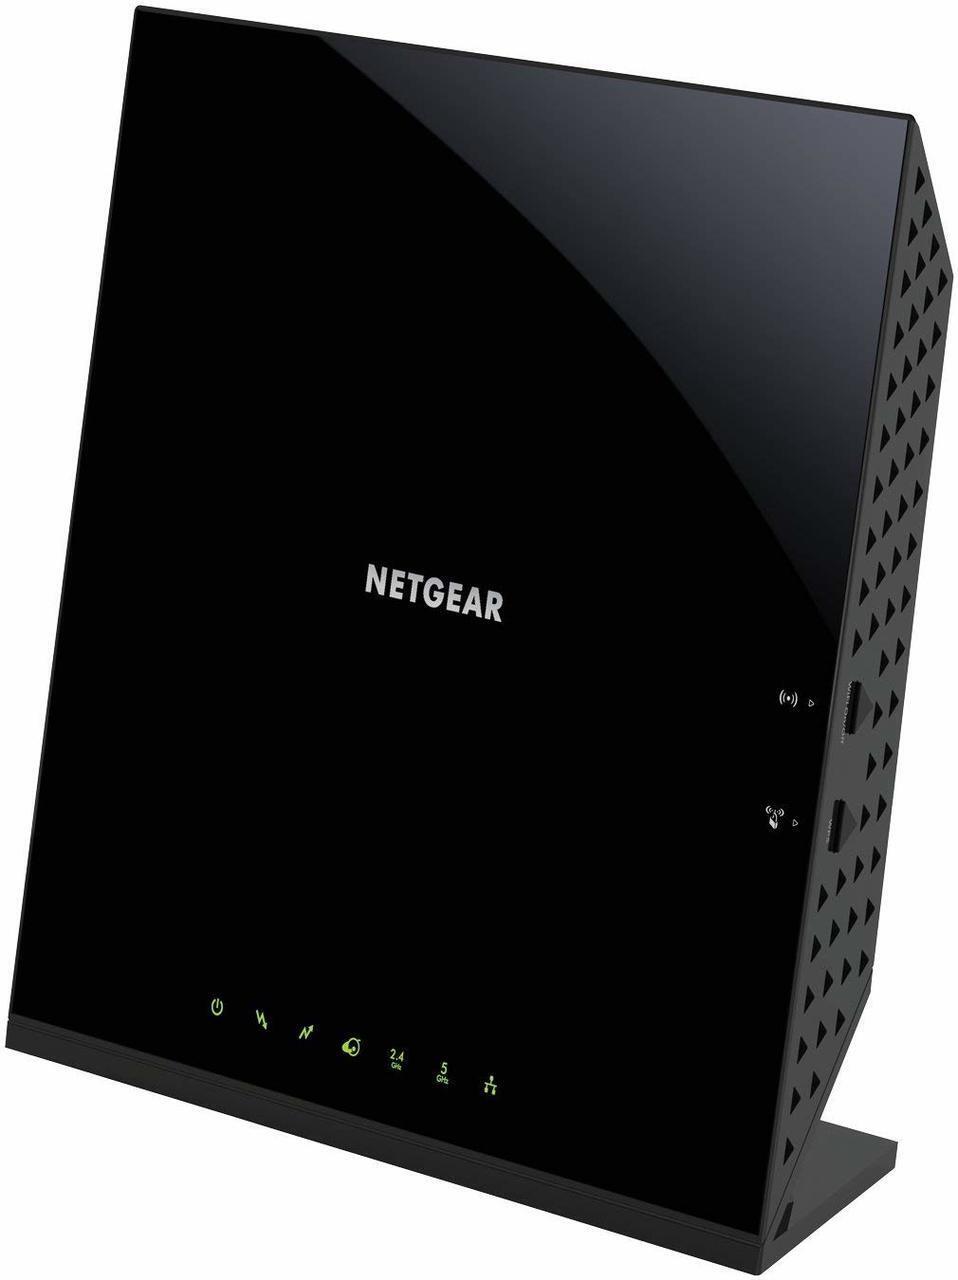 NETGEAR C6250-100NAR AC1600 (16x4) WiFi Cable Router Combo Certified Refurbished